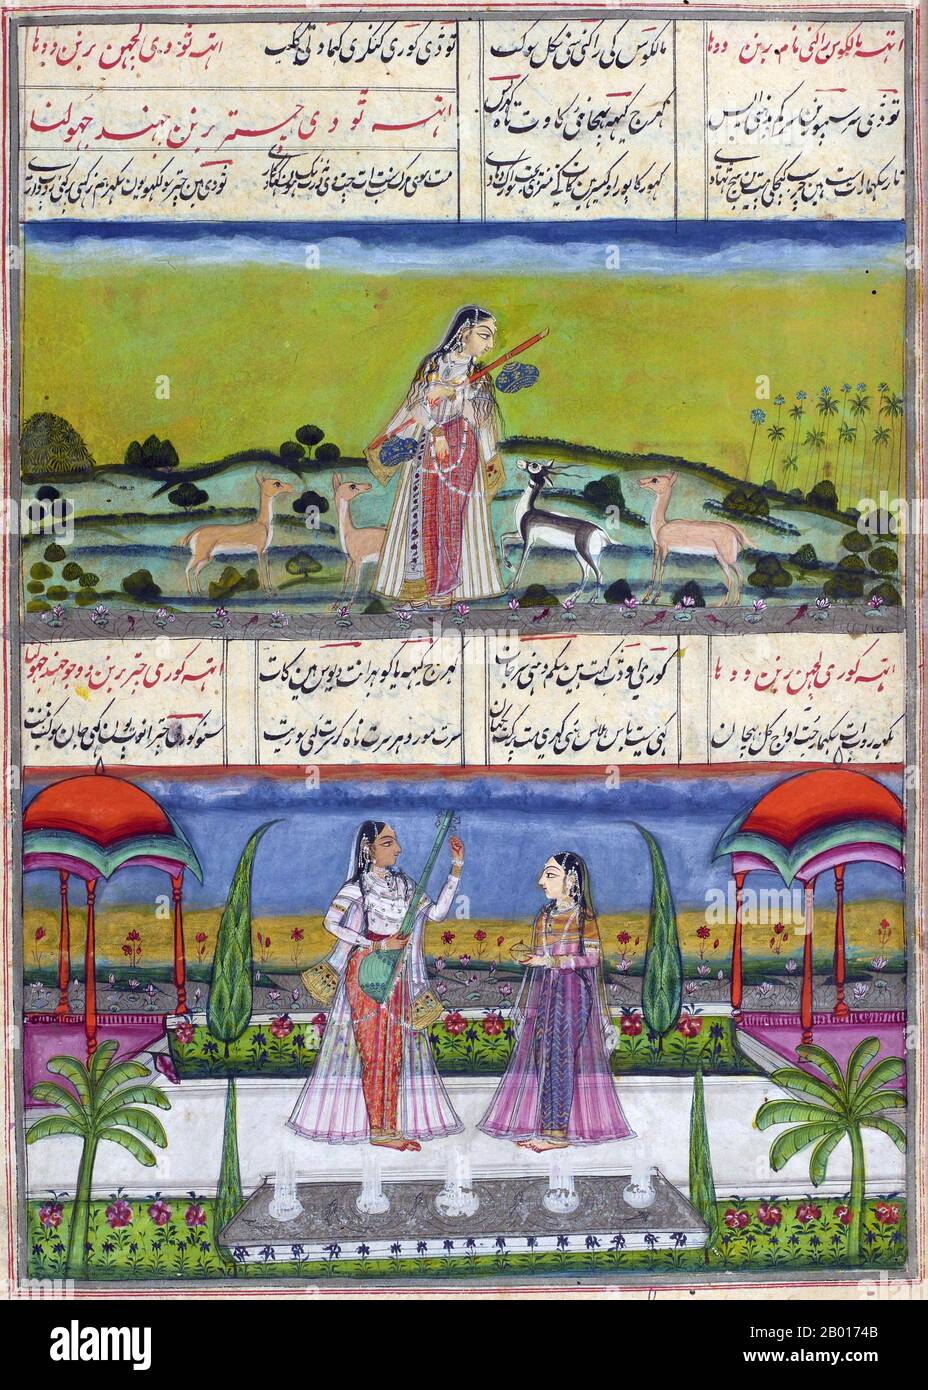 India: 'Above: Todi Ragini holding vina, with four gazelles; Below: Gauri Ragini holding lute, with female attendant'. Ragamala miniature painting, c. 1800.  Ragamala Paintings are a series of illustrative paintings from medieval India based on Ragamala or the 'Garland of Ragas', depicting various Indian musical nodes, Ragas. They stand as a classical example of the amalgamation of art, poetry and classical music in medieval India. Ragamala paintings were created in most schools of Indian painting, starting in the 16th and 17th centuries. Stock Photo